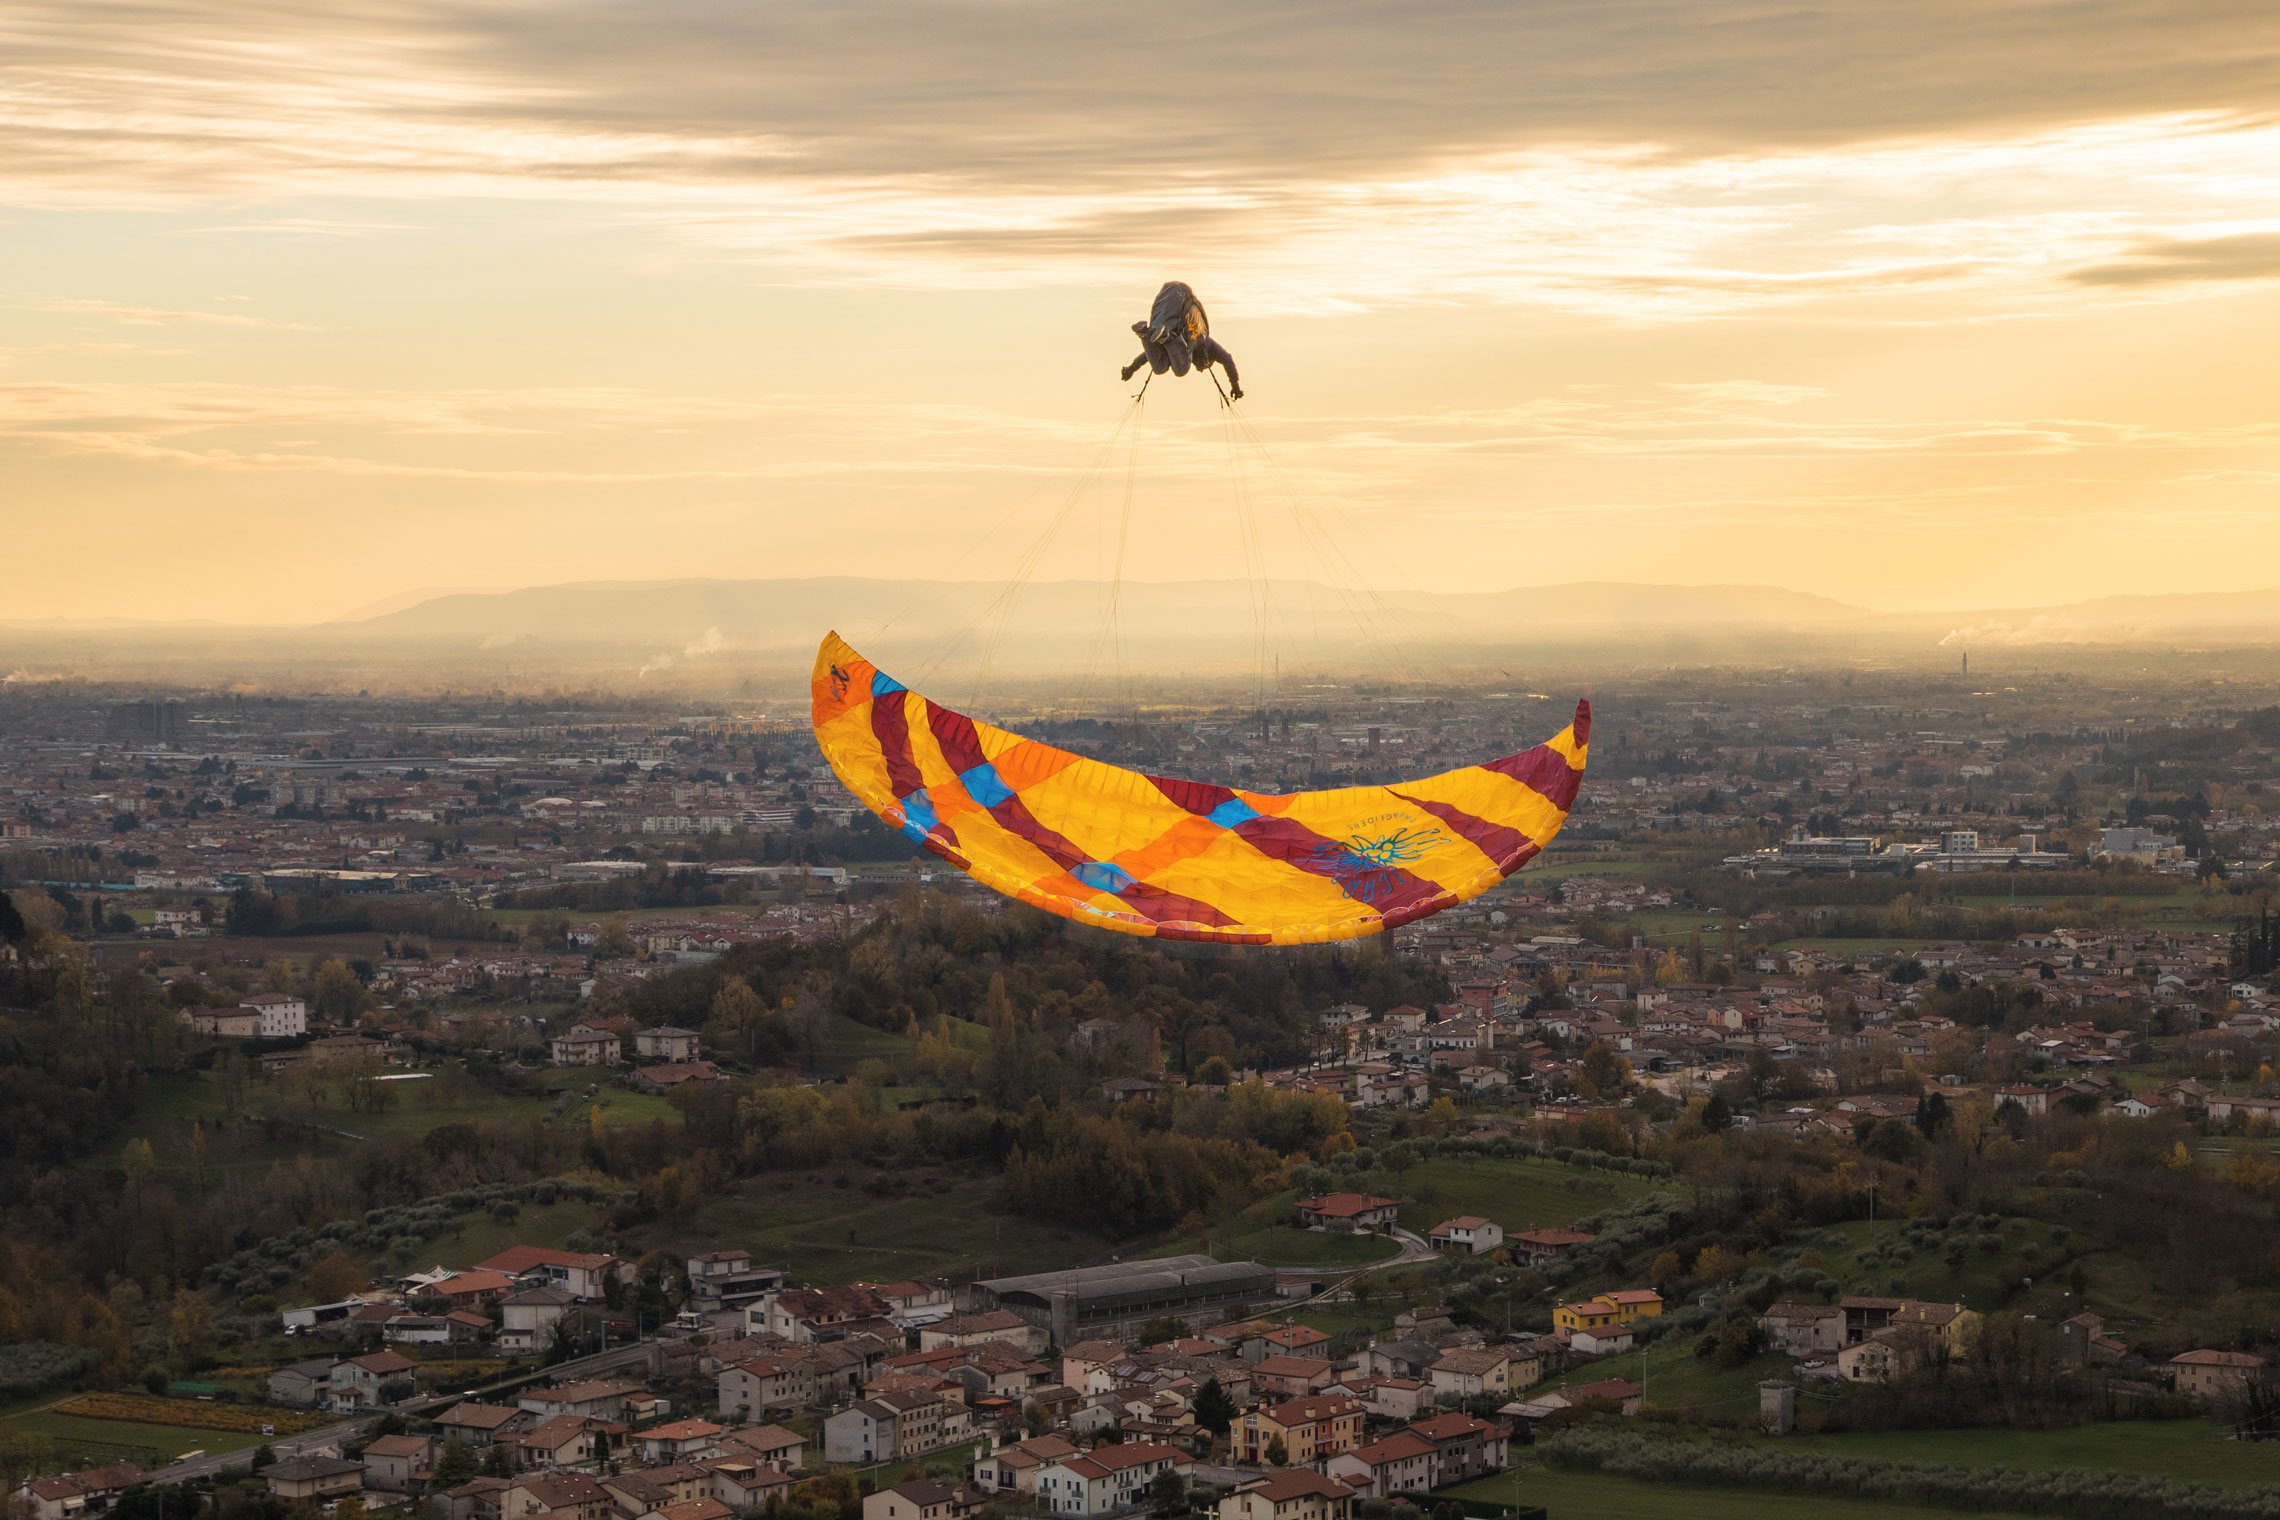 New paraglider Icaro Xenus for sale